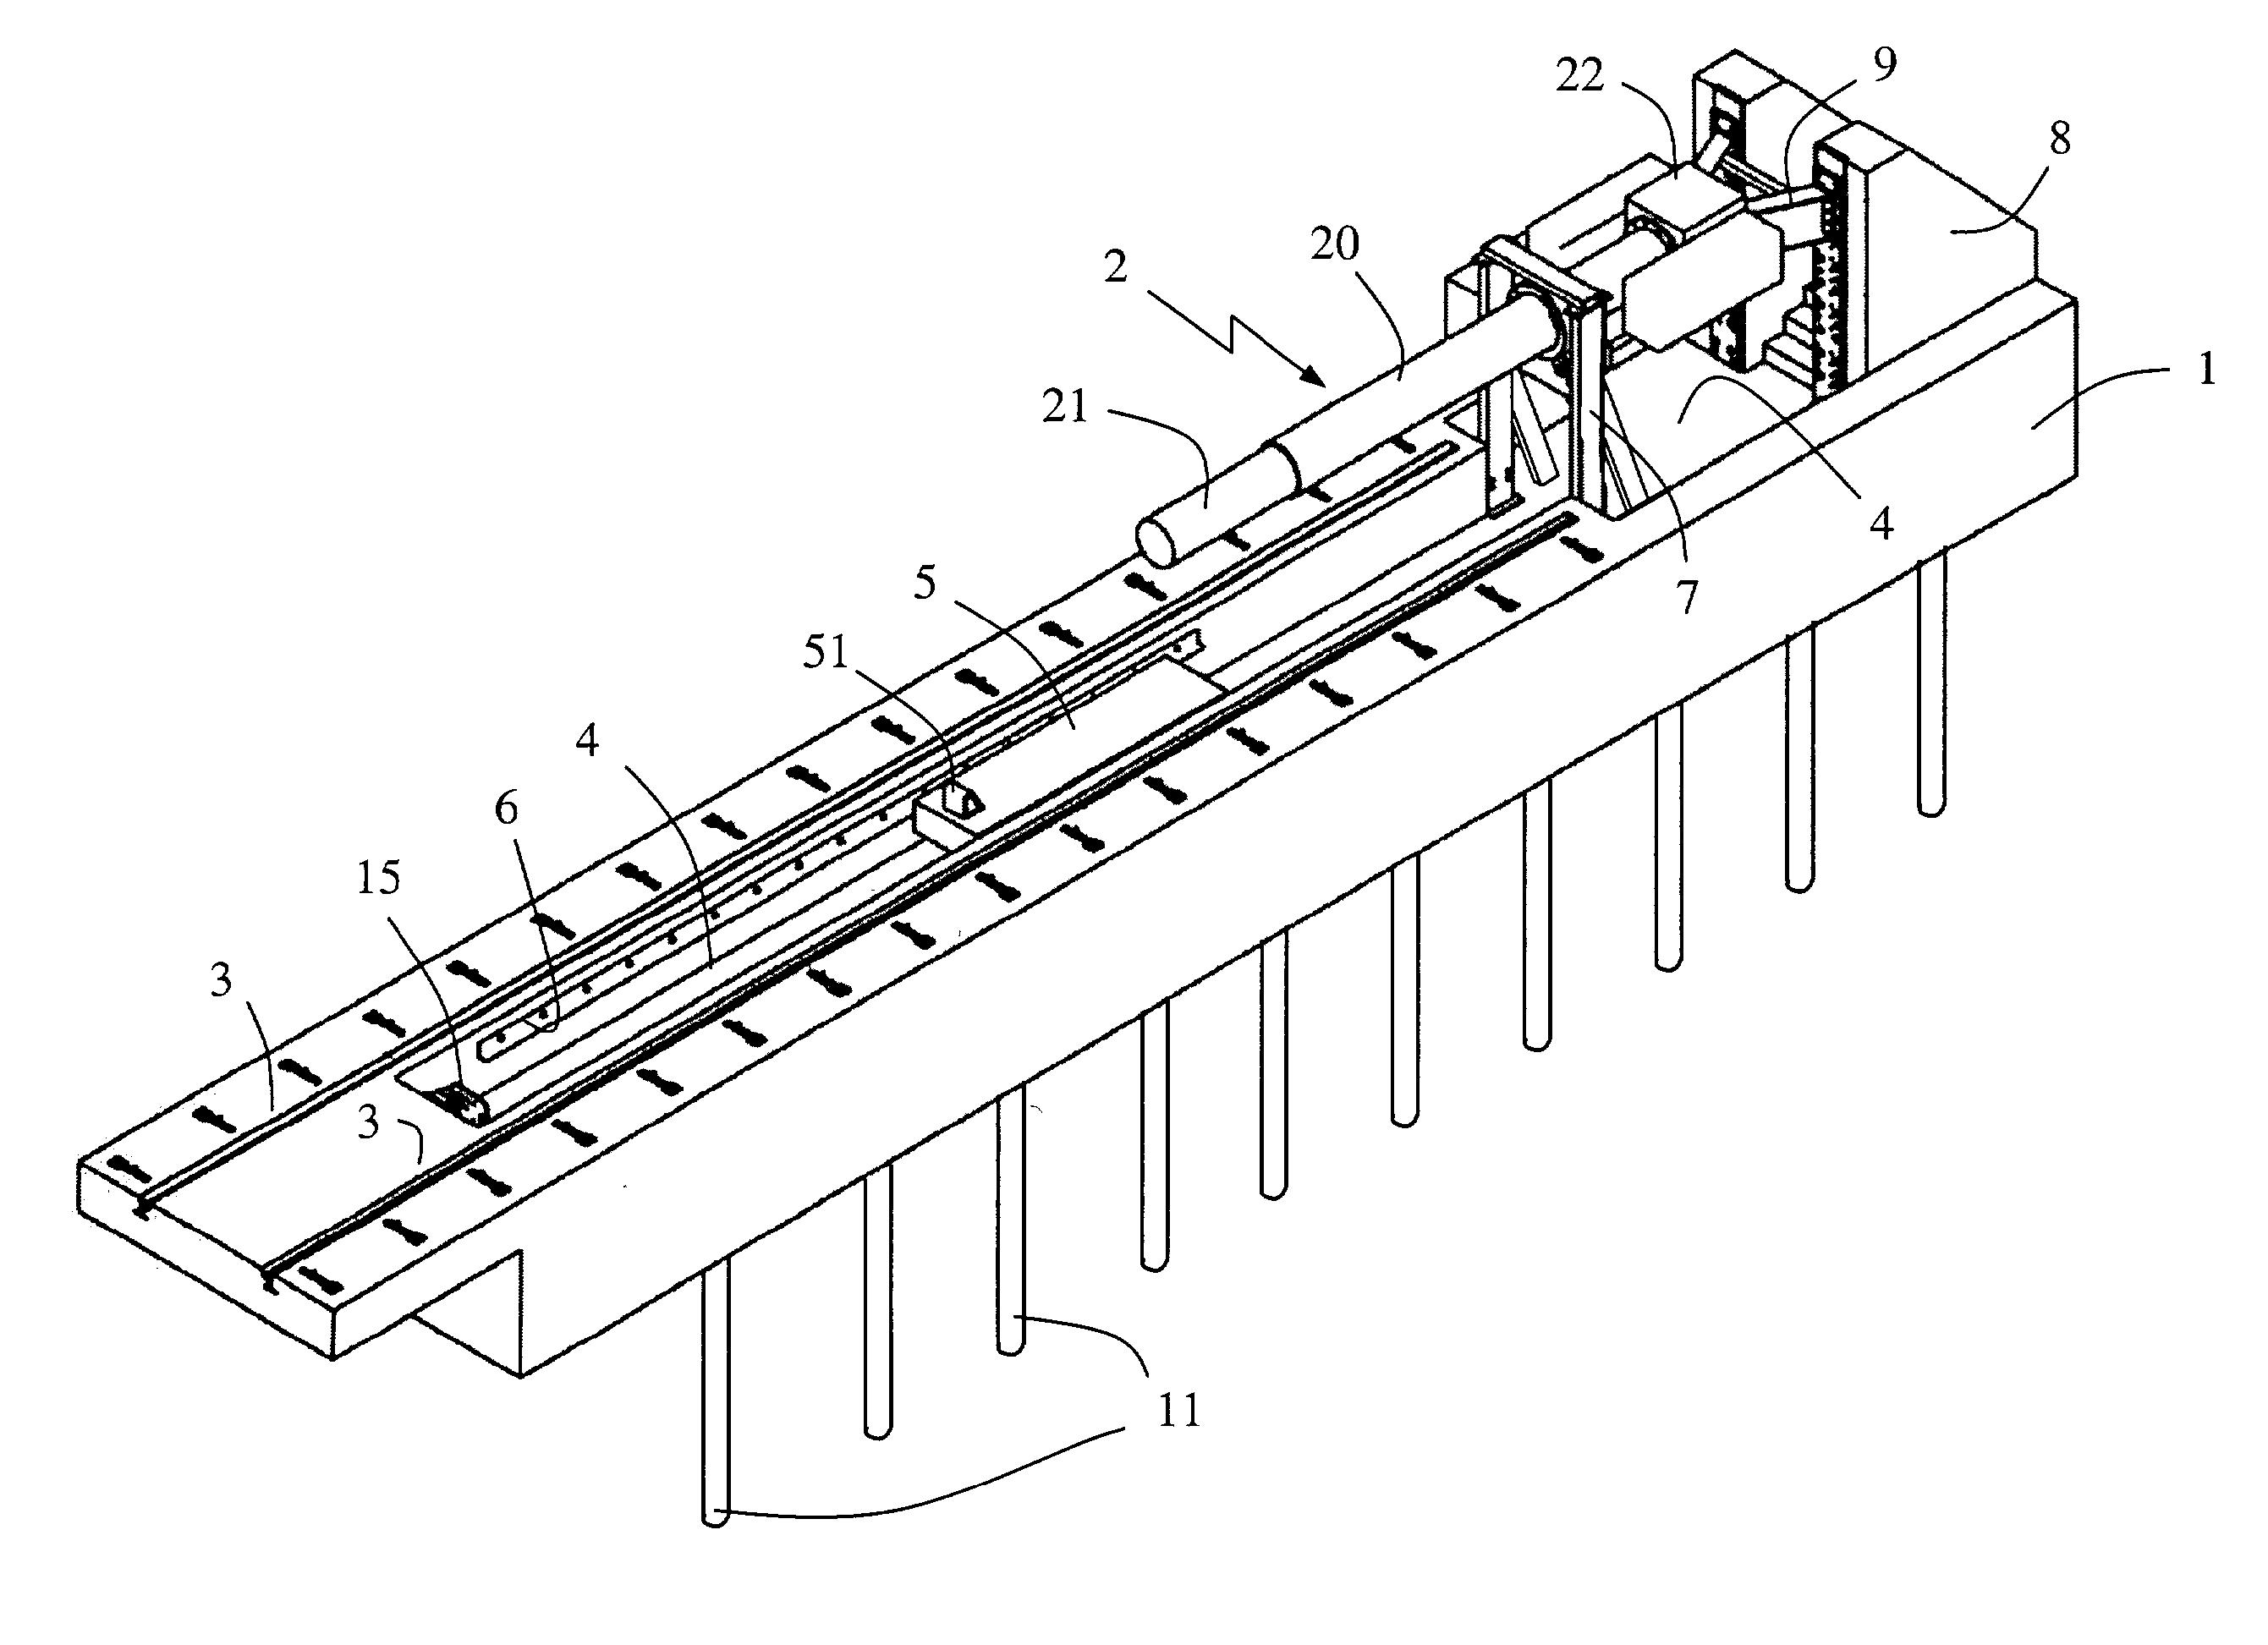 Apparatus for performing mechanical tests on structures